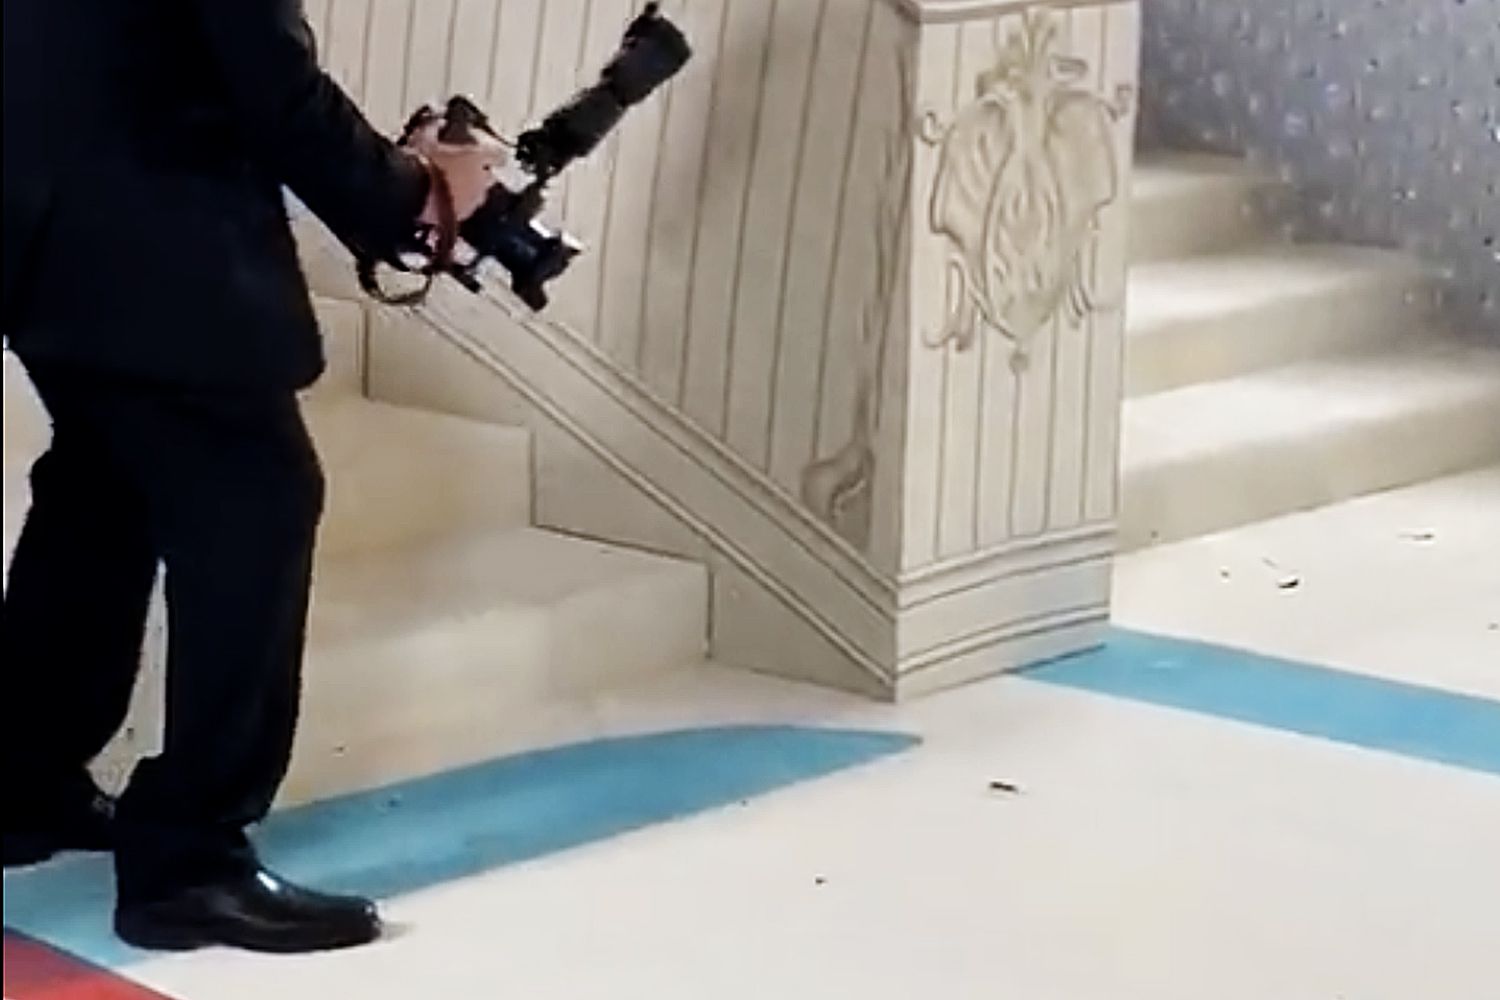 A cockroach stole the show at the Met Gala, which feels appropriate